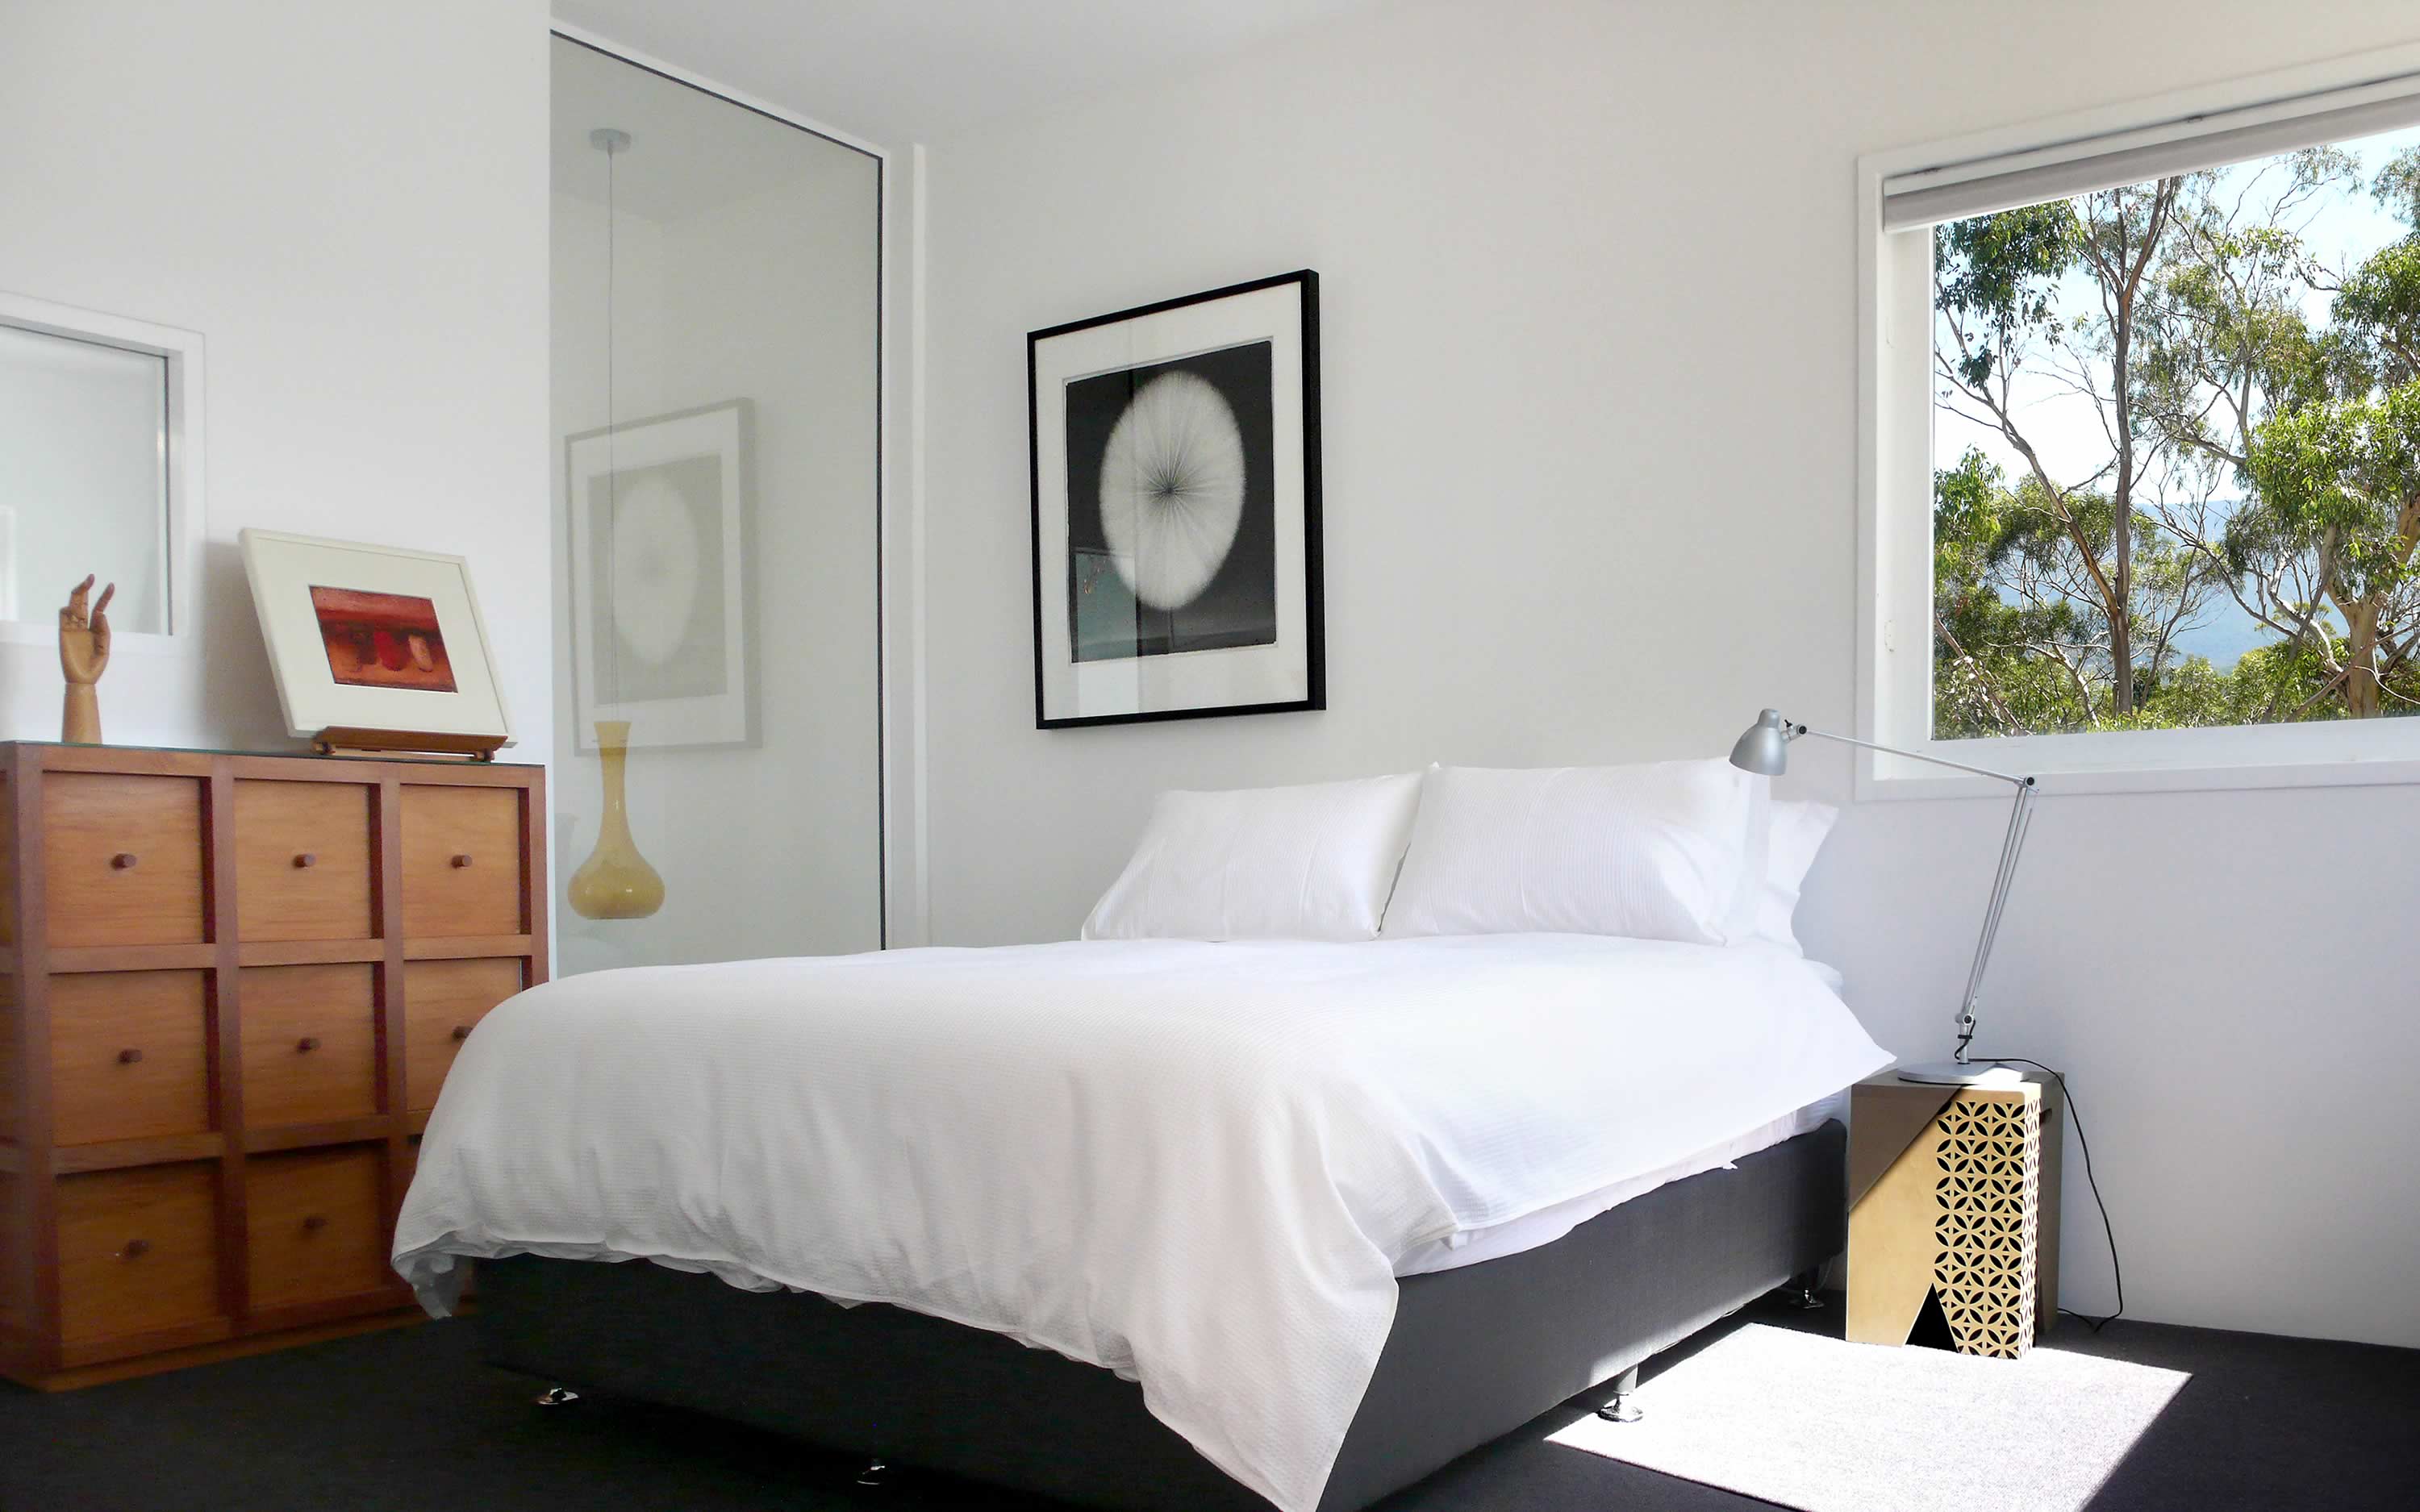 Photo of the OUTSIDE THE BOX bedroom showing a white-covered bed and art works, with eucalypt canopy visible through a window.